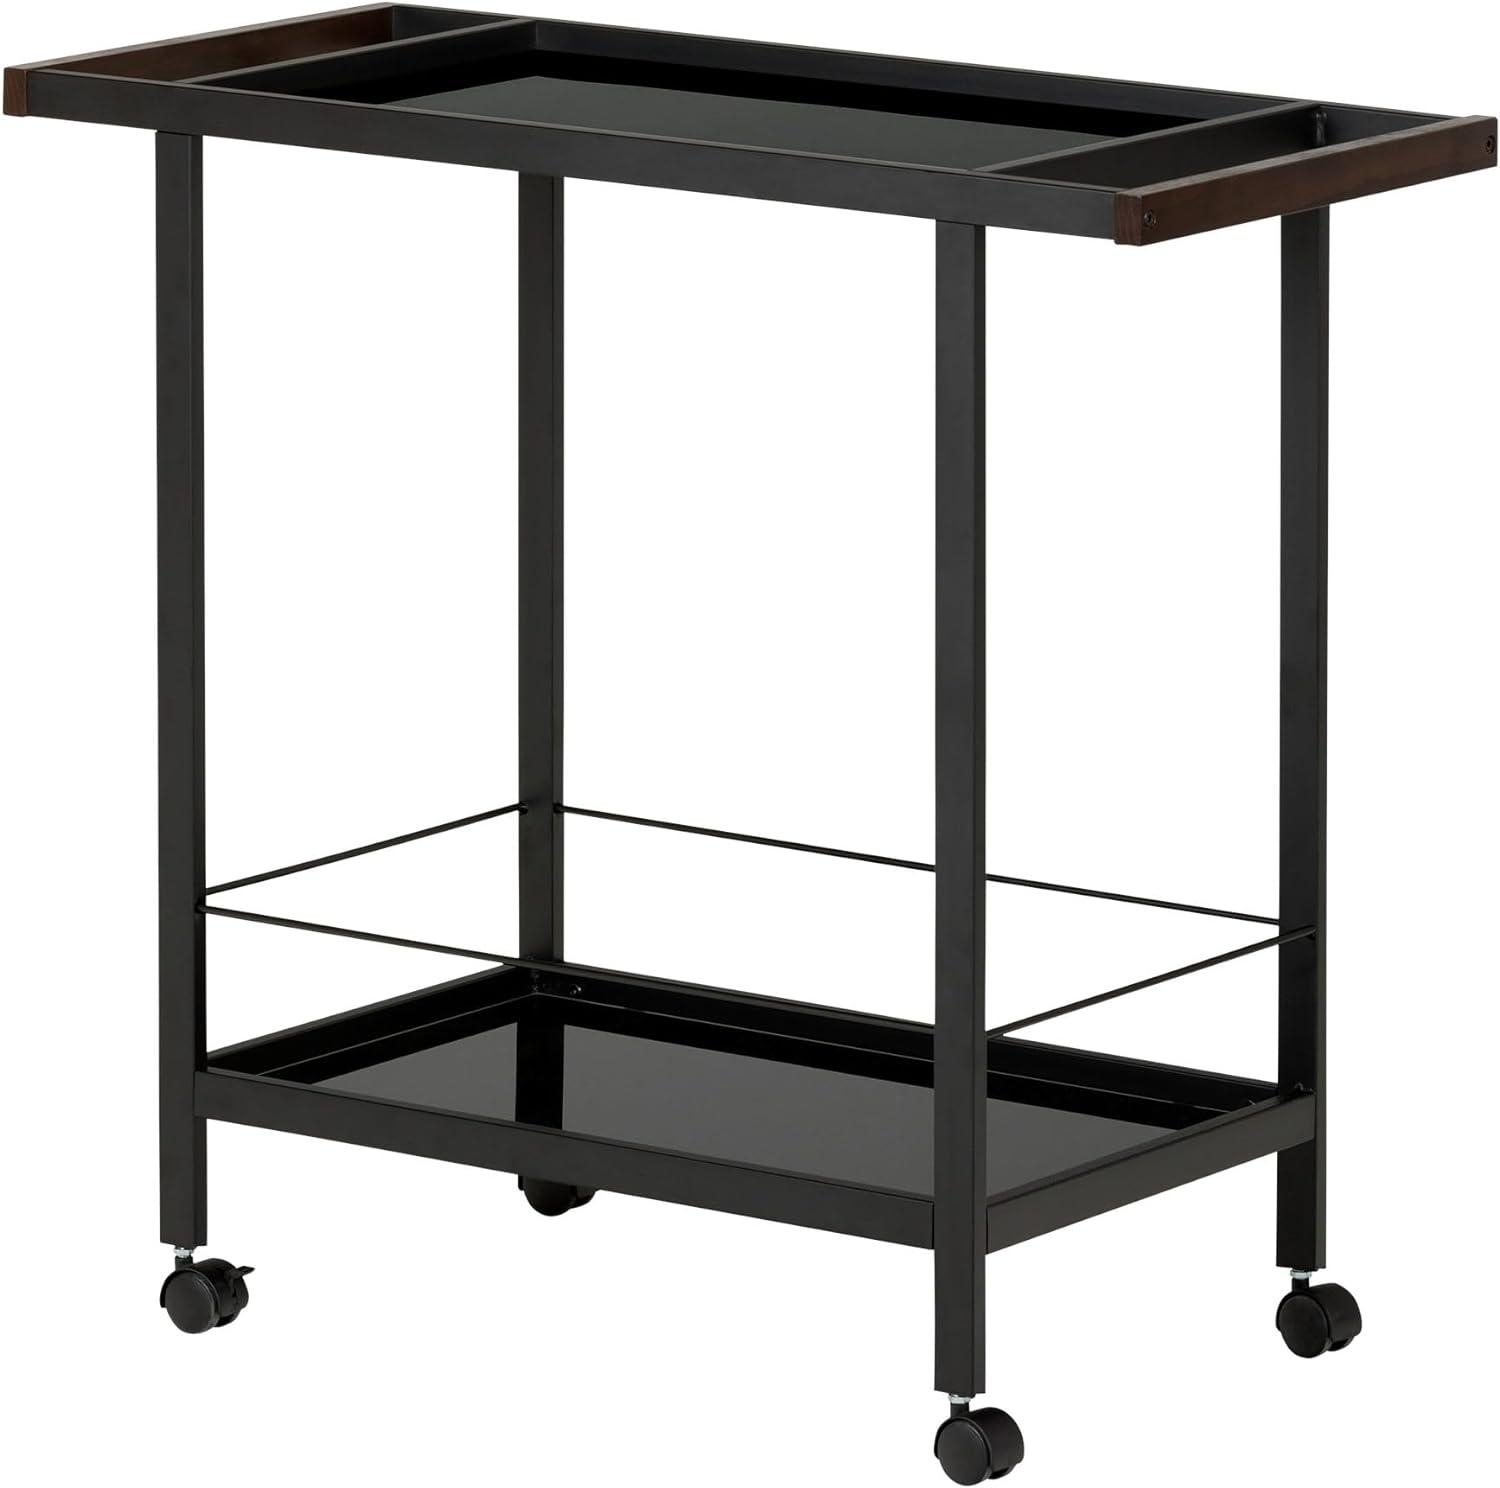 Chic City Life Black Metal Bar Cart with Wine Storage and Wheels